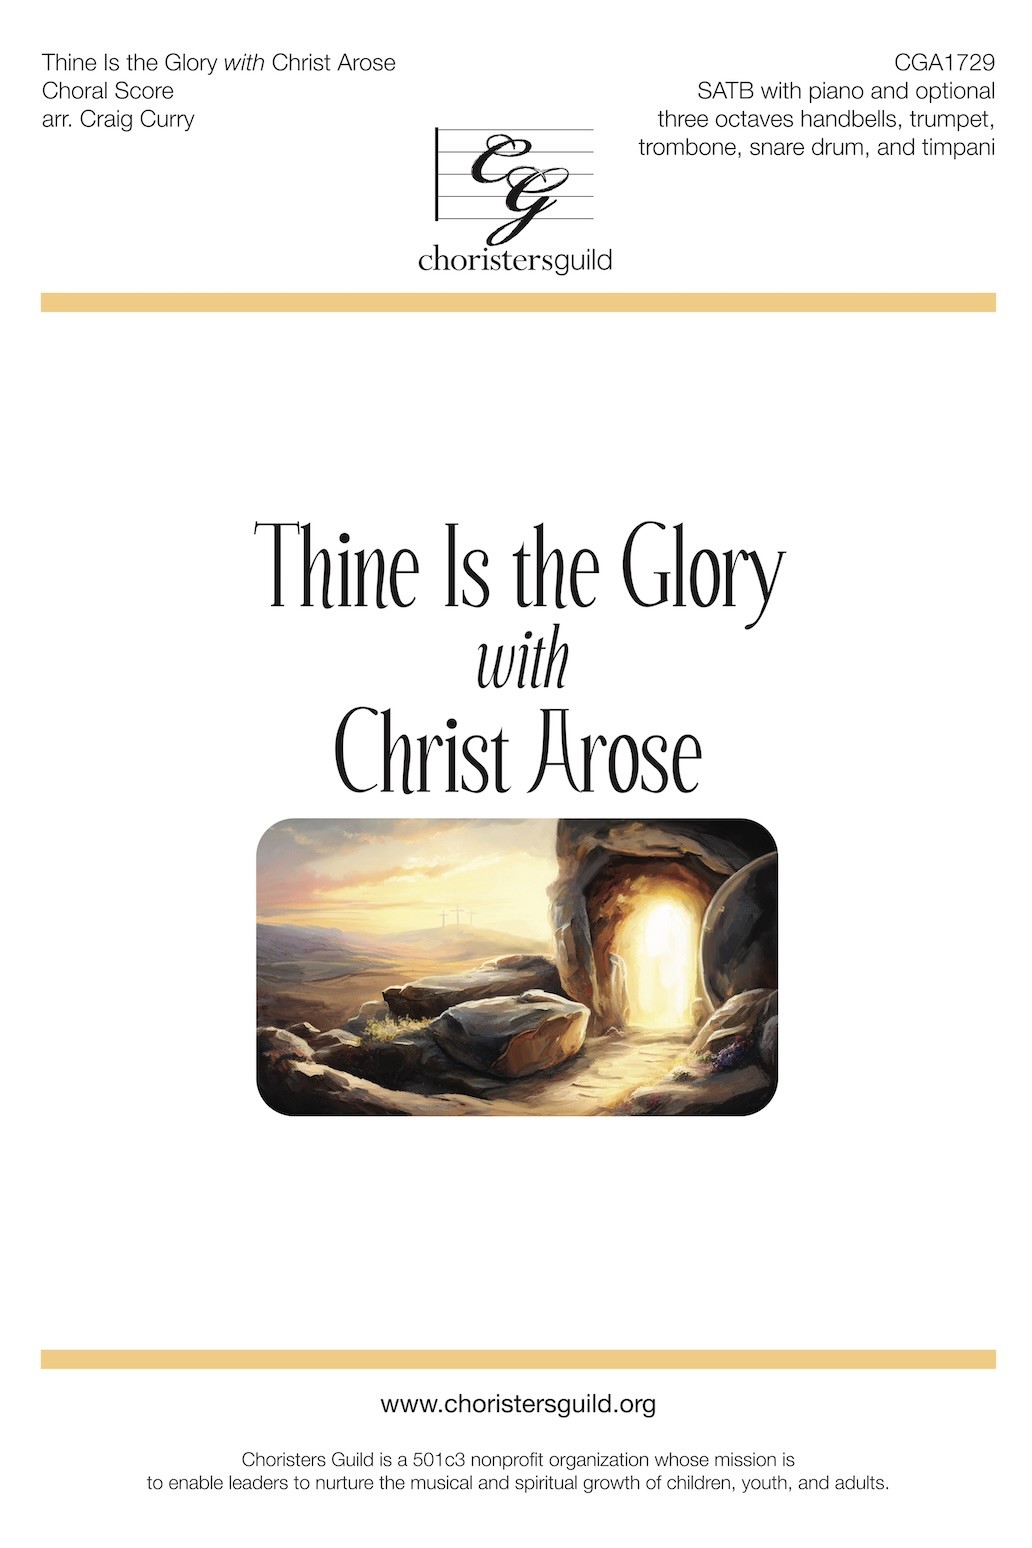 Thine Is the Glory (with Christ Arose) - SATB